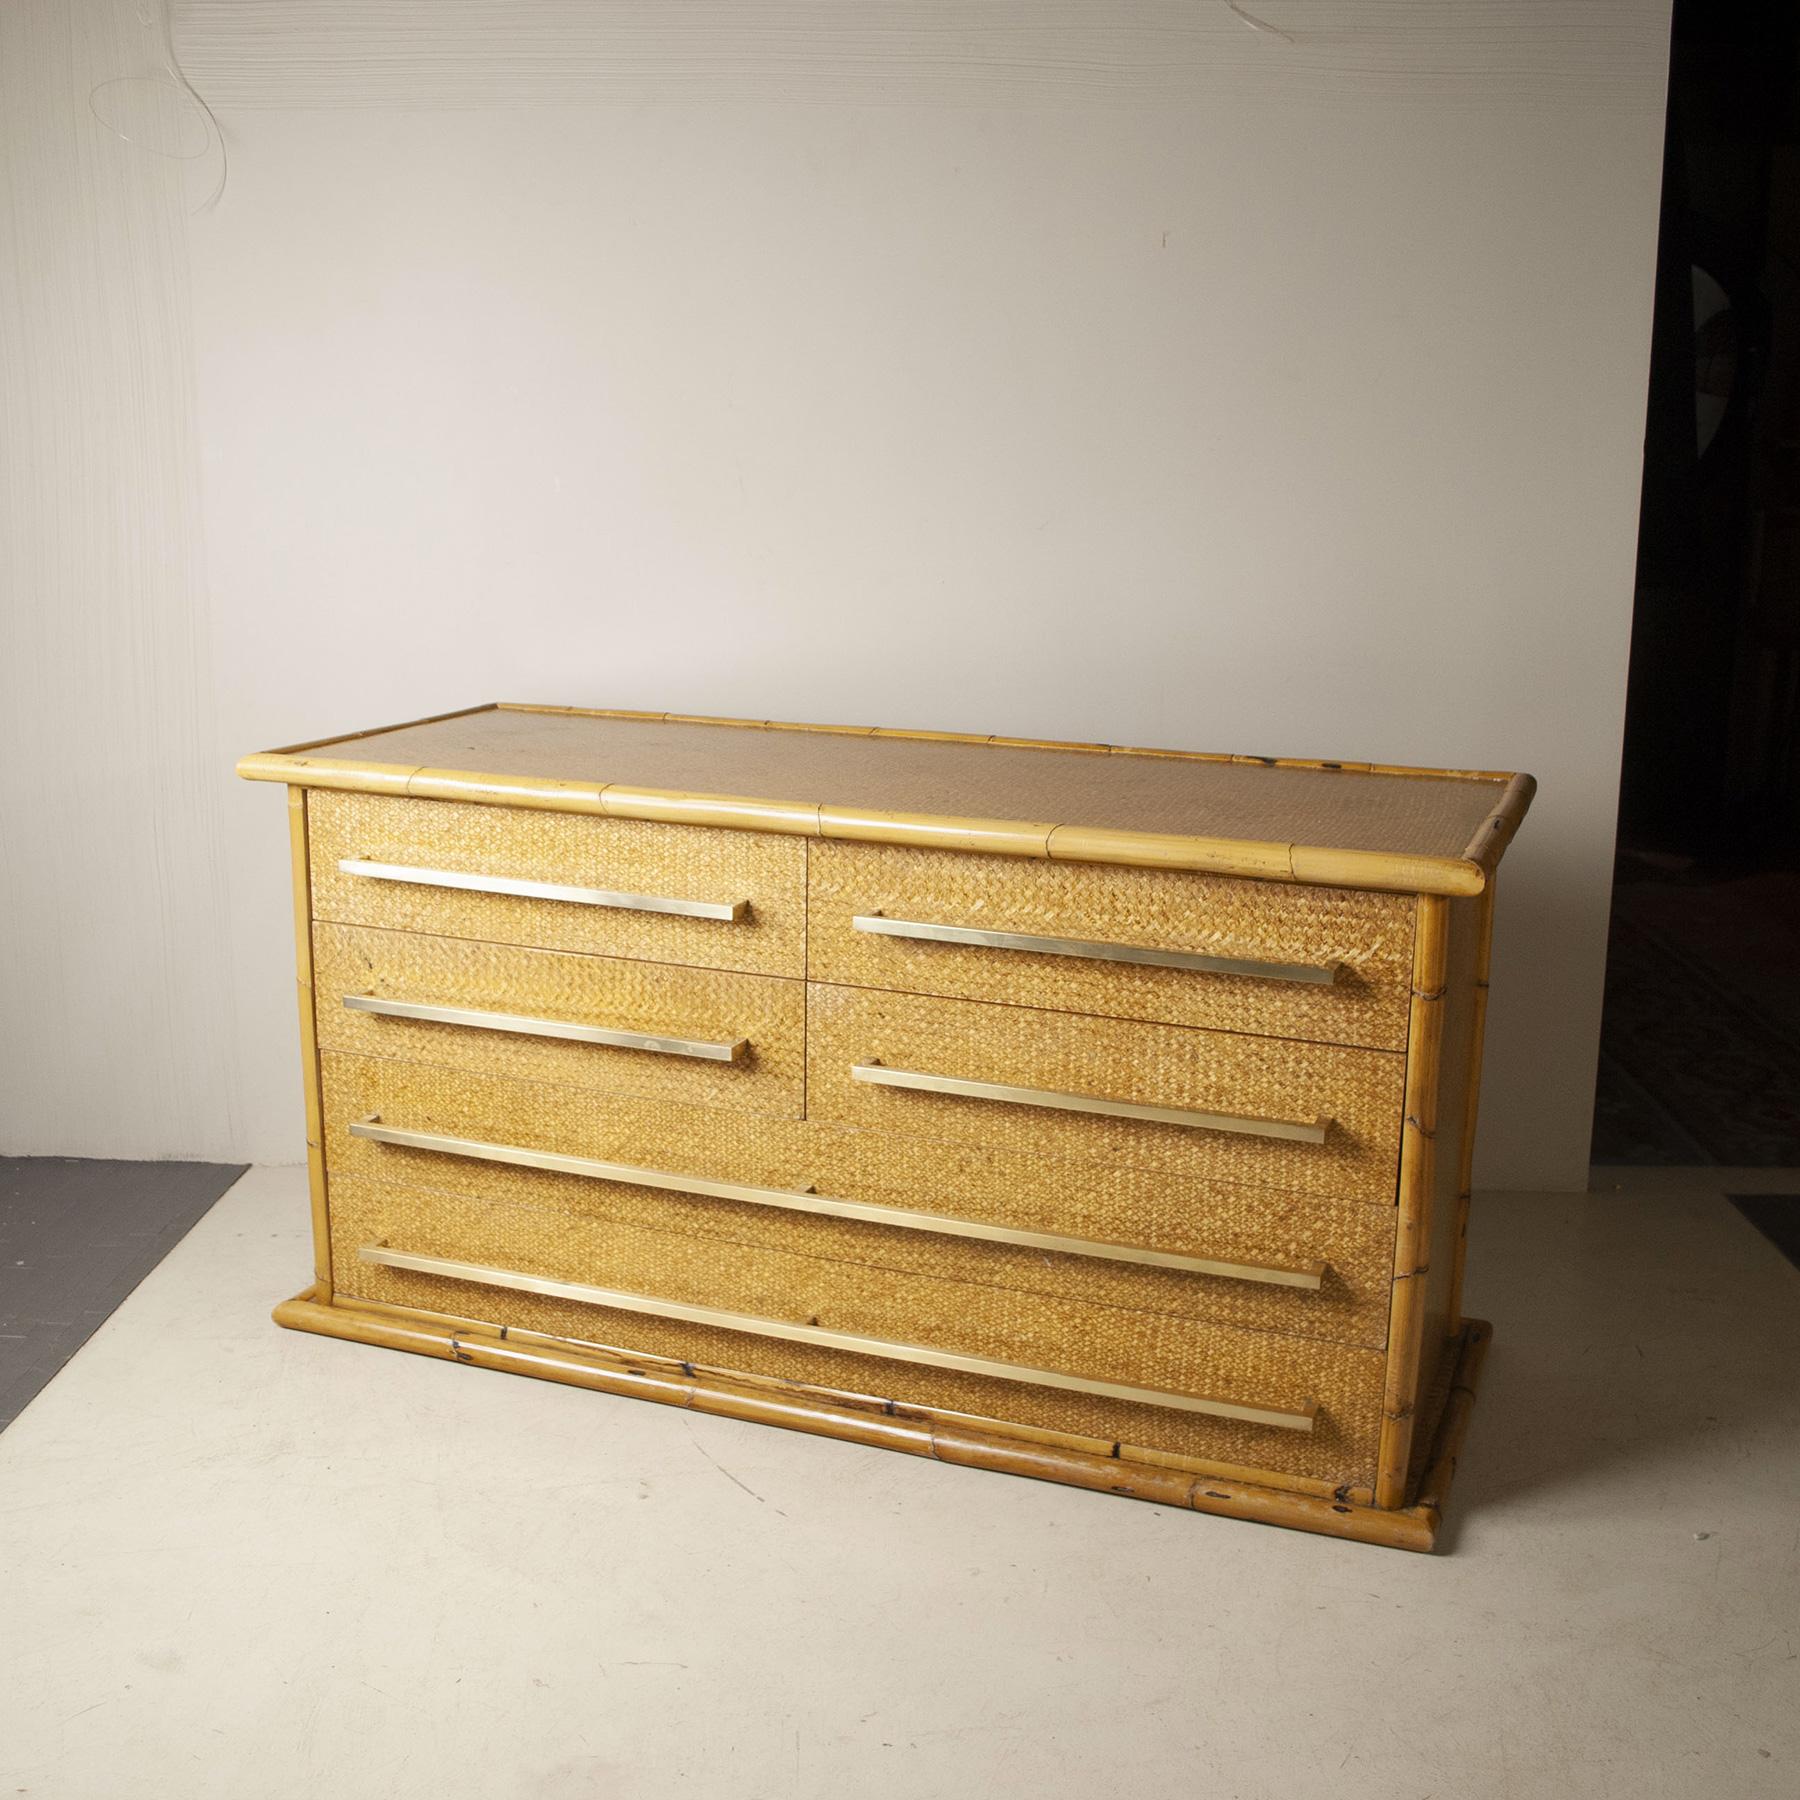 Italian Midcentury Bamboo Sideboard from the Sixties In Good Condition For Sale In bari, IT